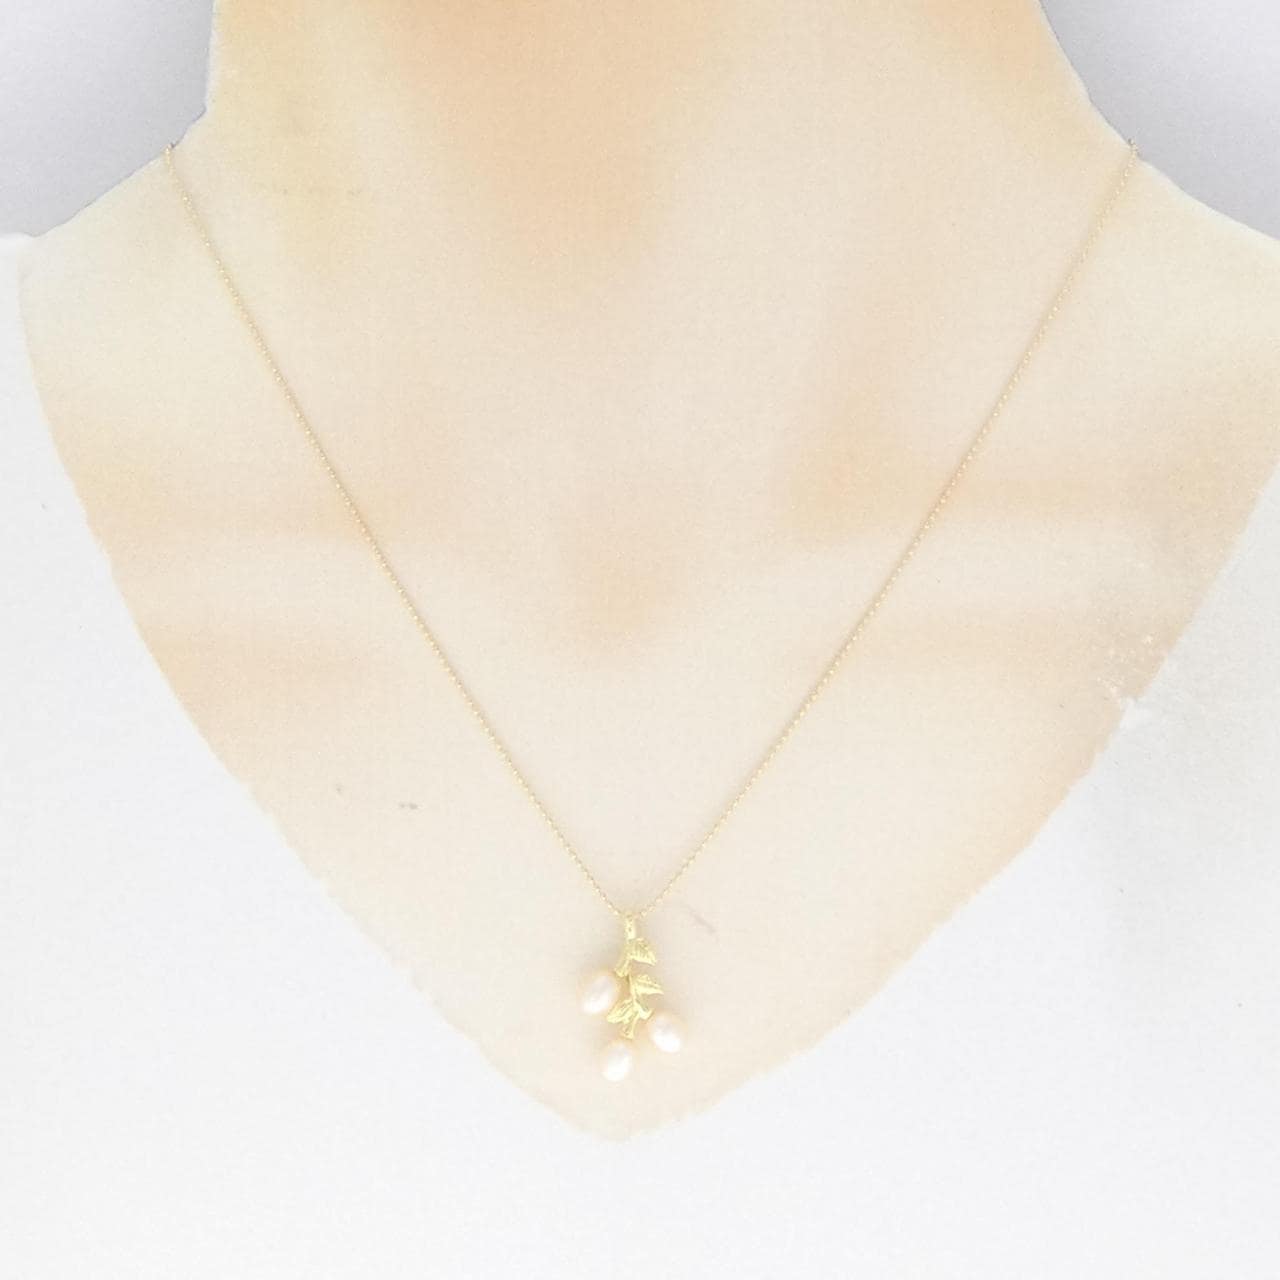 K18YG freshwater pearl necklace